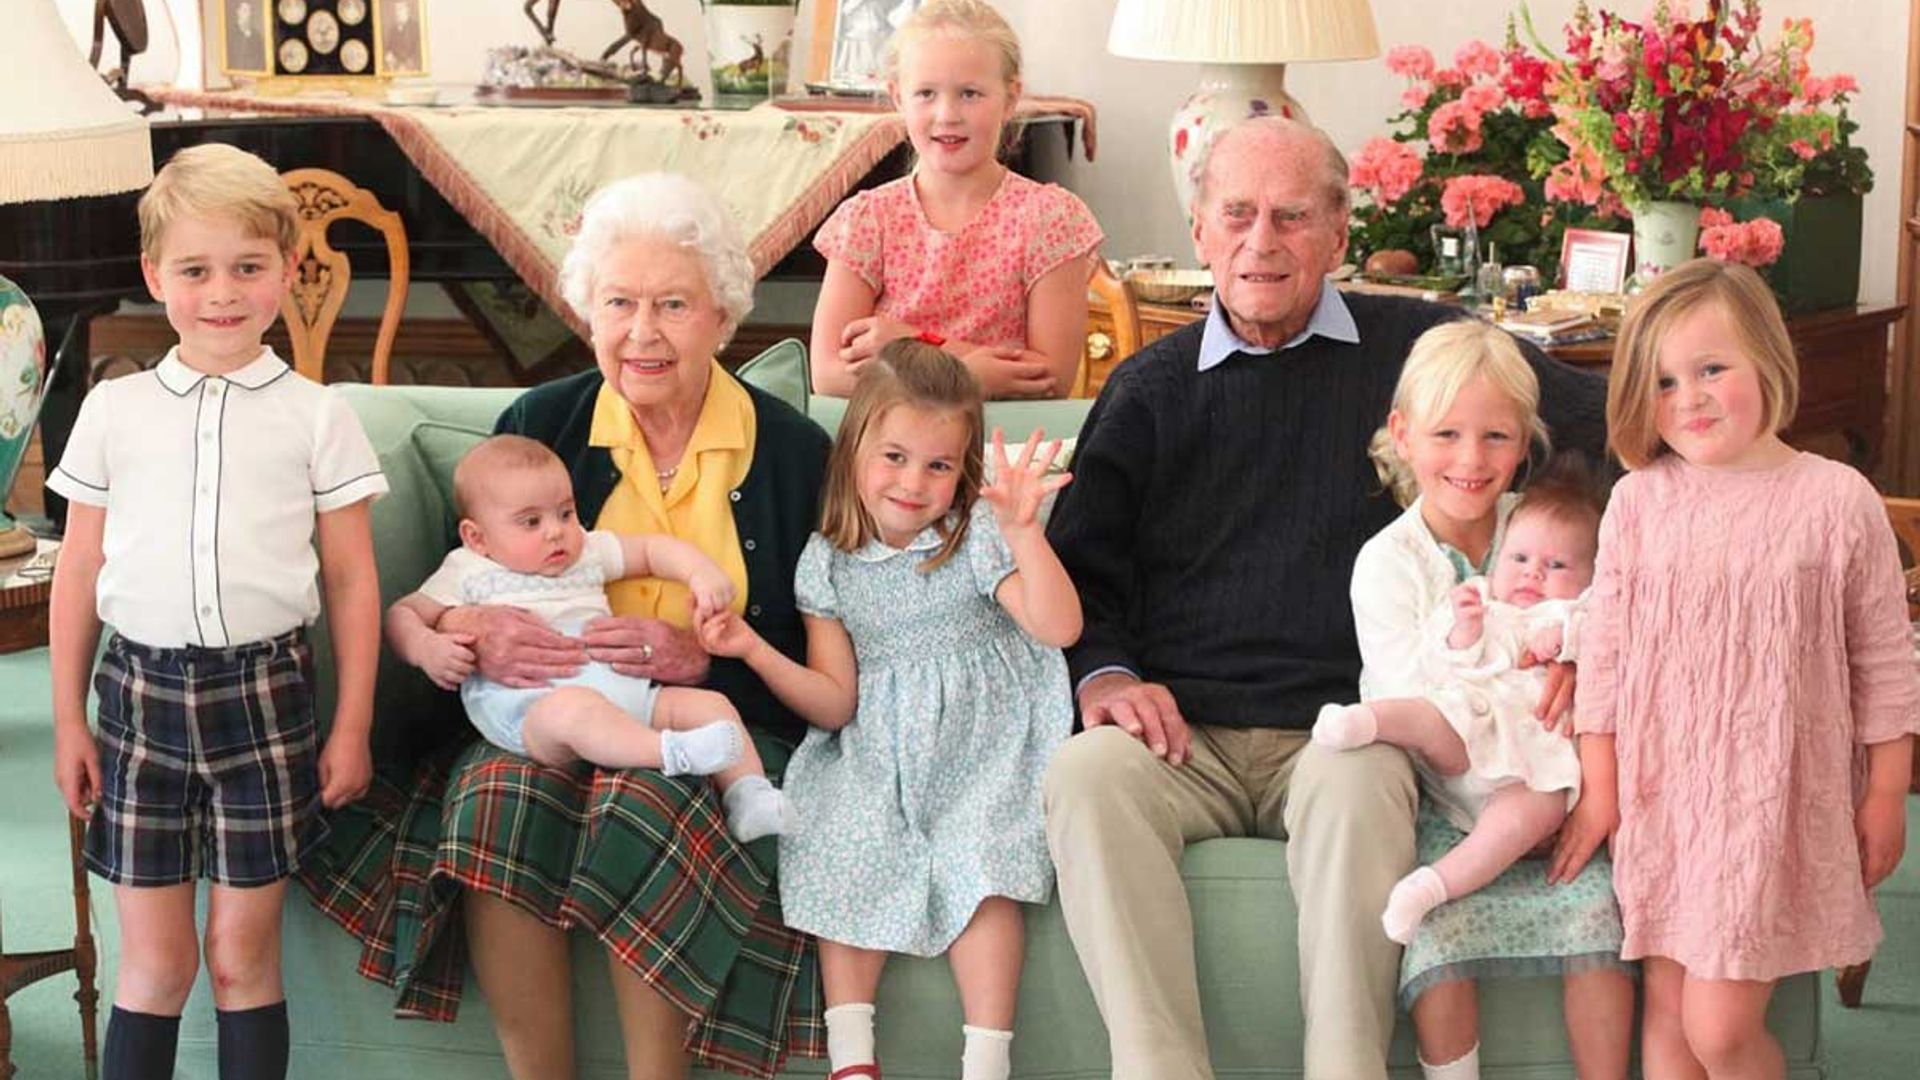 Prince William and Kate reveal George, Charlotte and Louis are missing great-grandfather Prince Philip